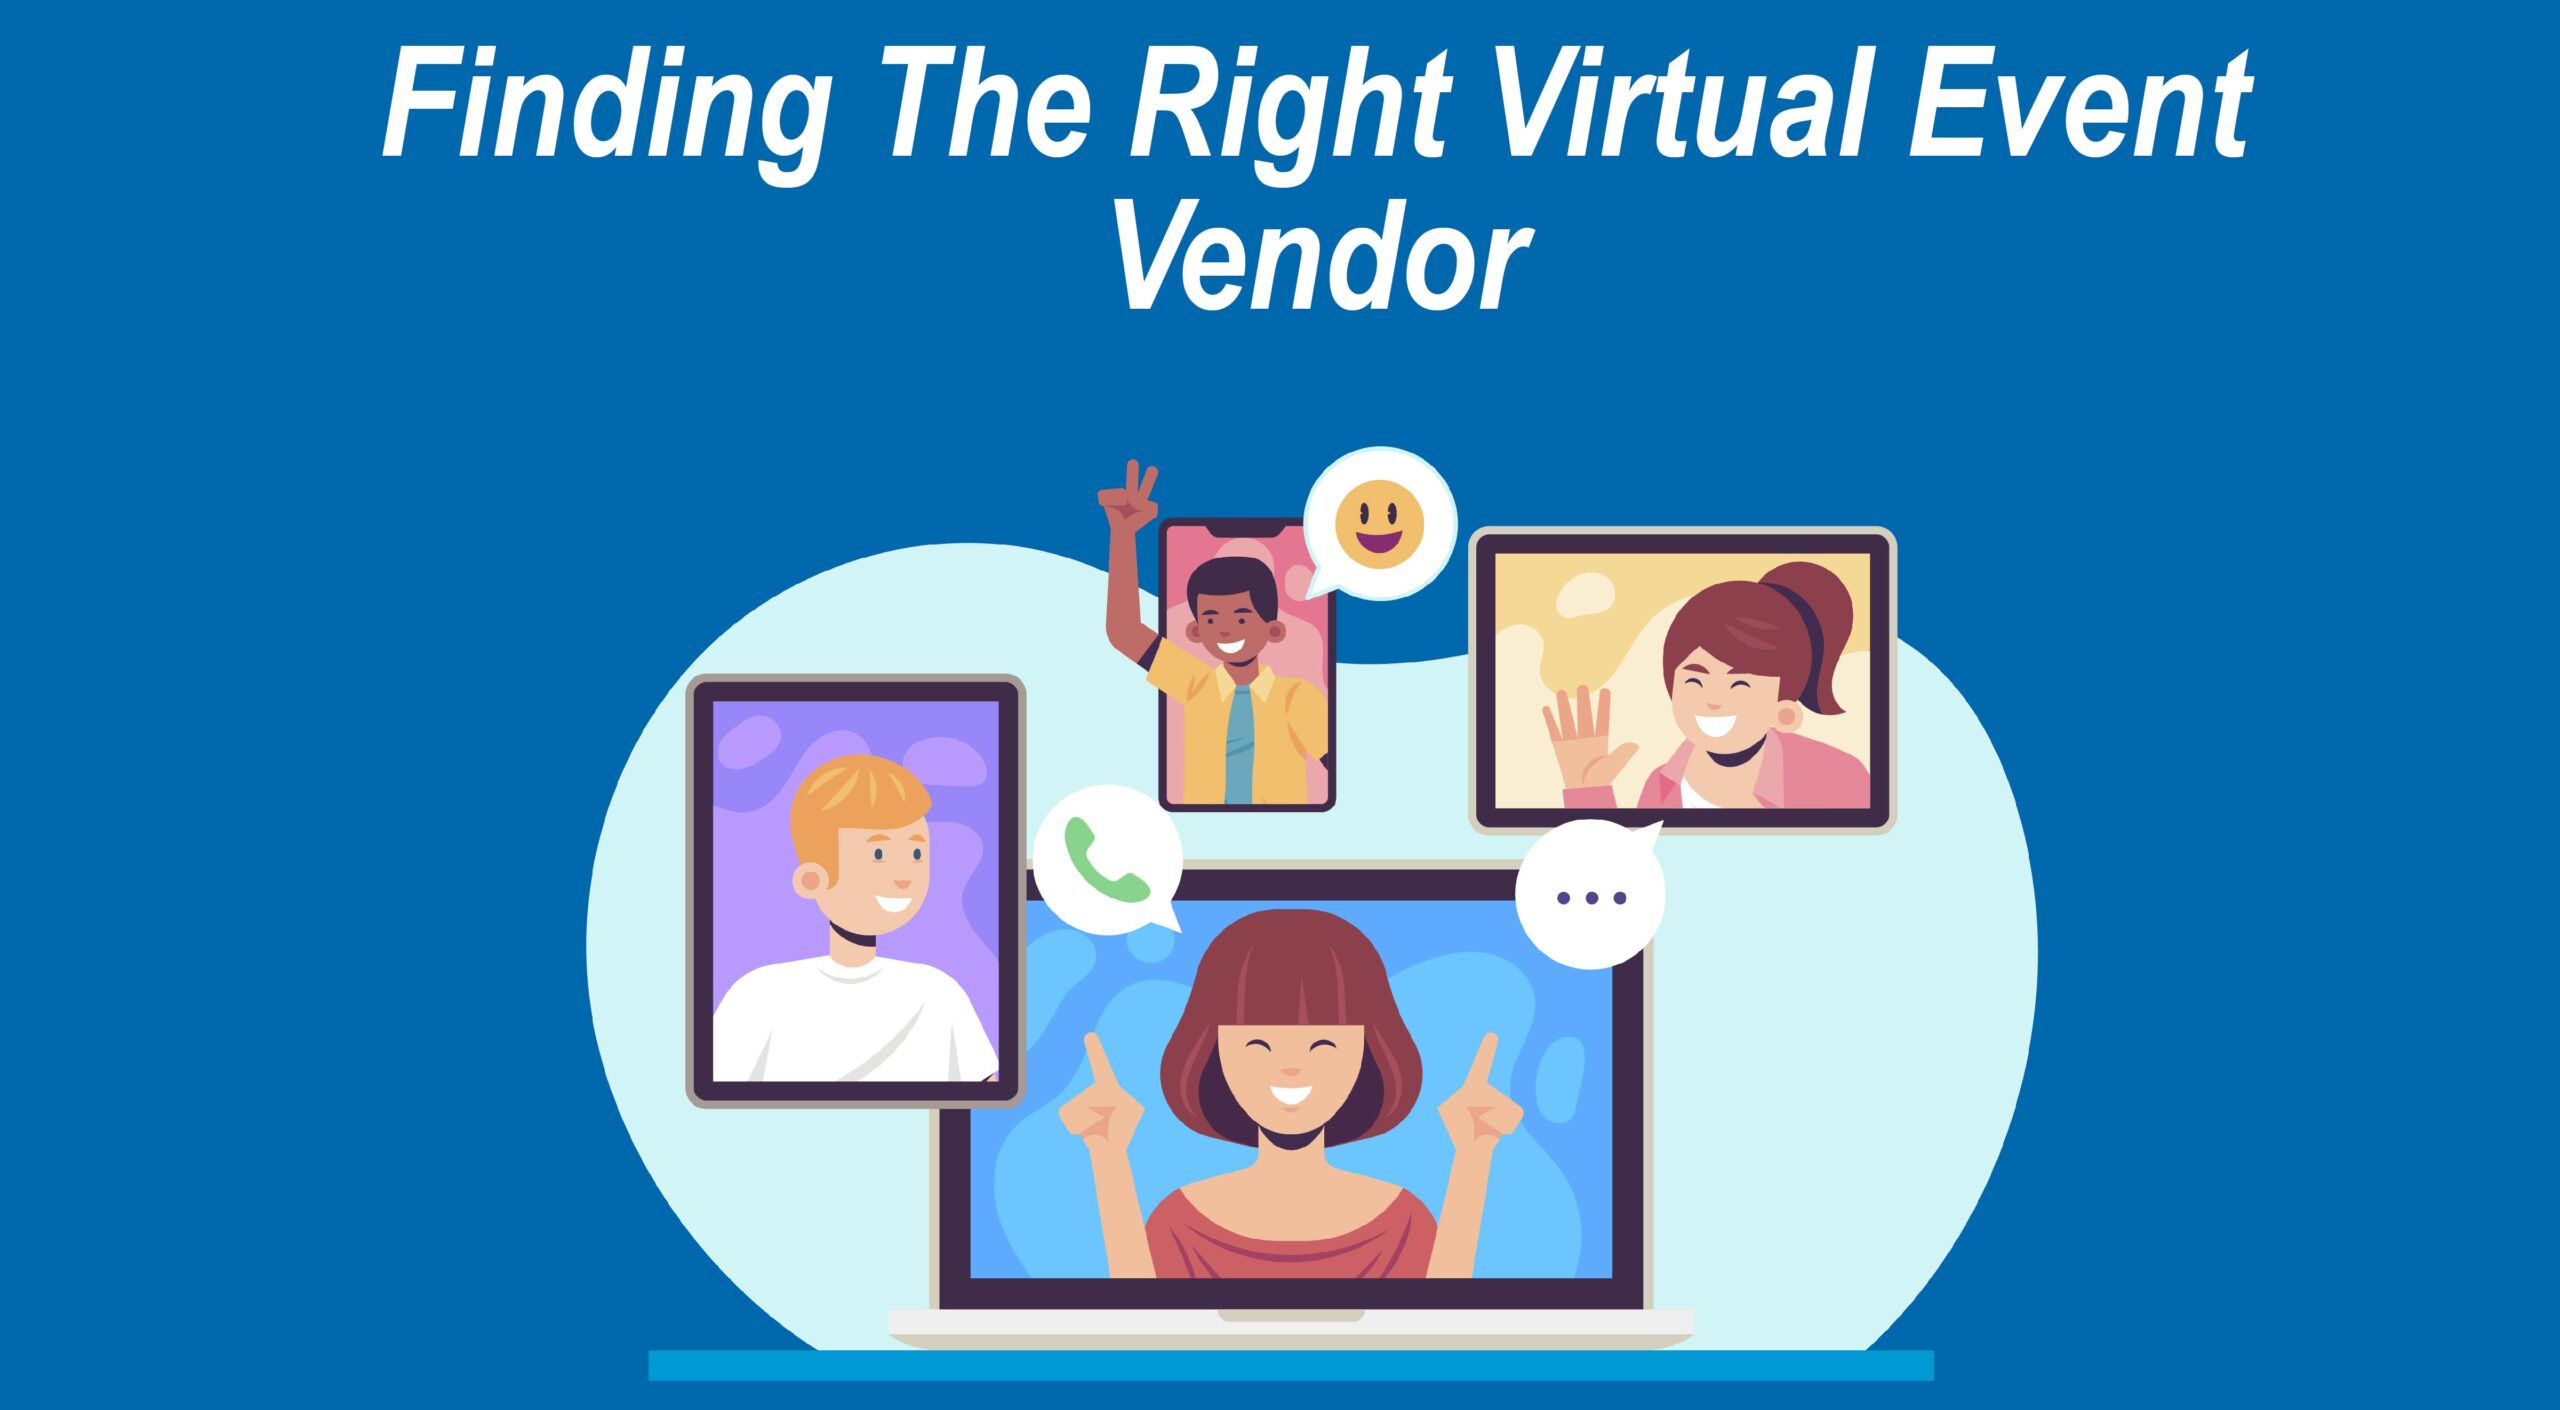 Finding The Right Virtual Event Vendor